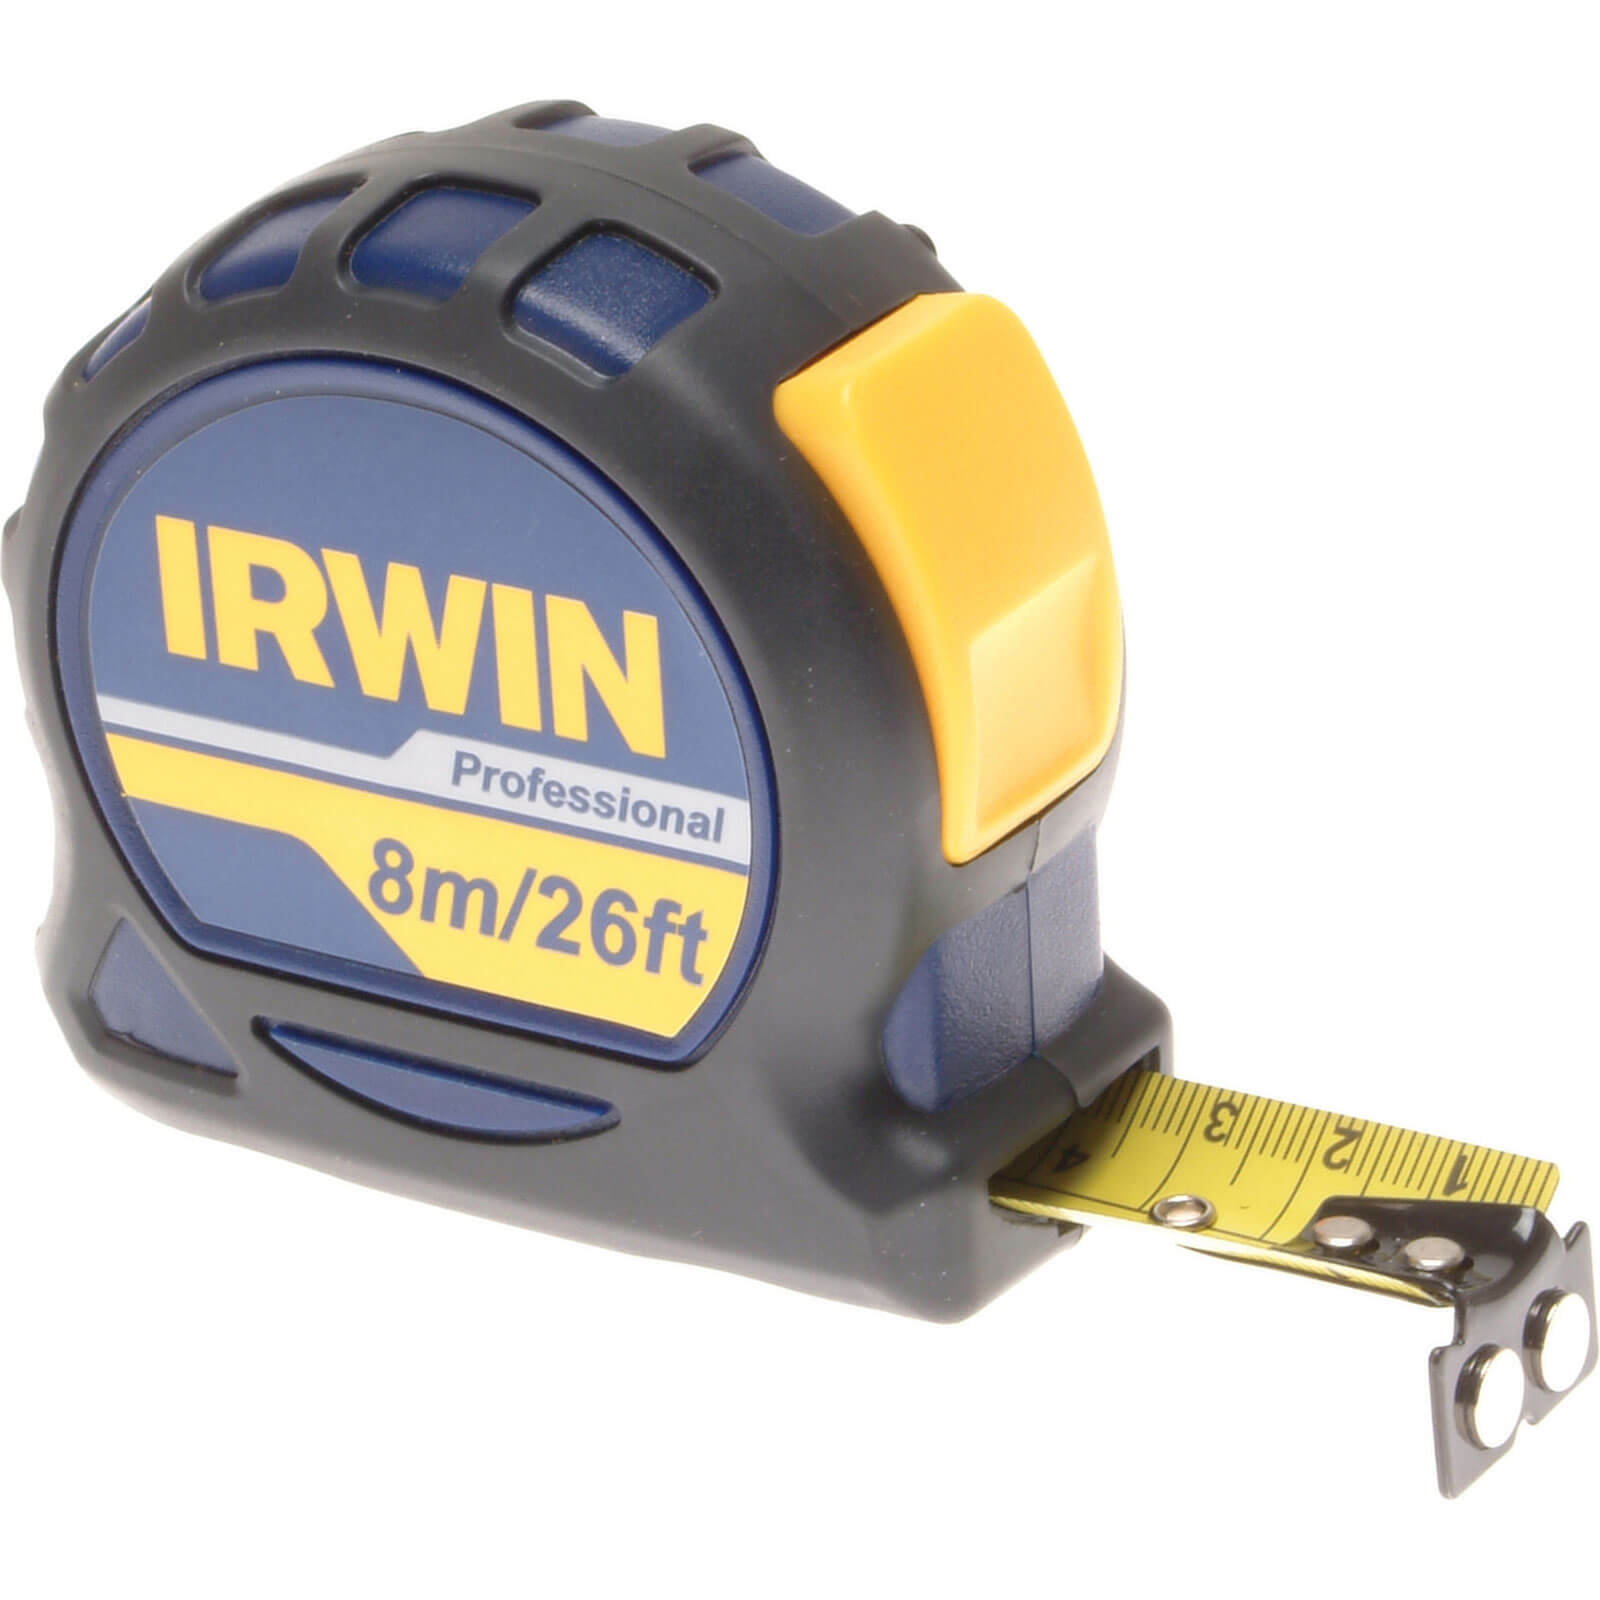 Image of Irwin Professional Pocket Tape Measure Imperial & Metric 26ft / 8m 25mm